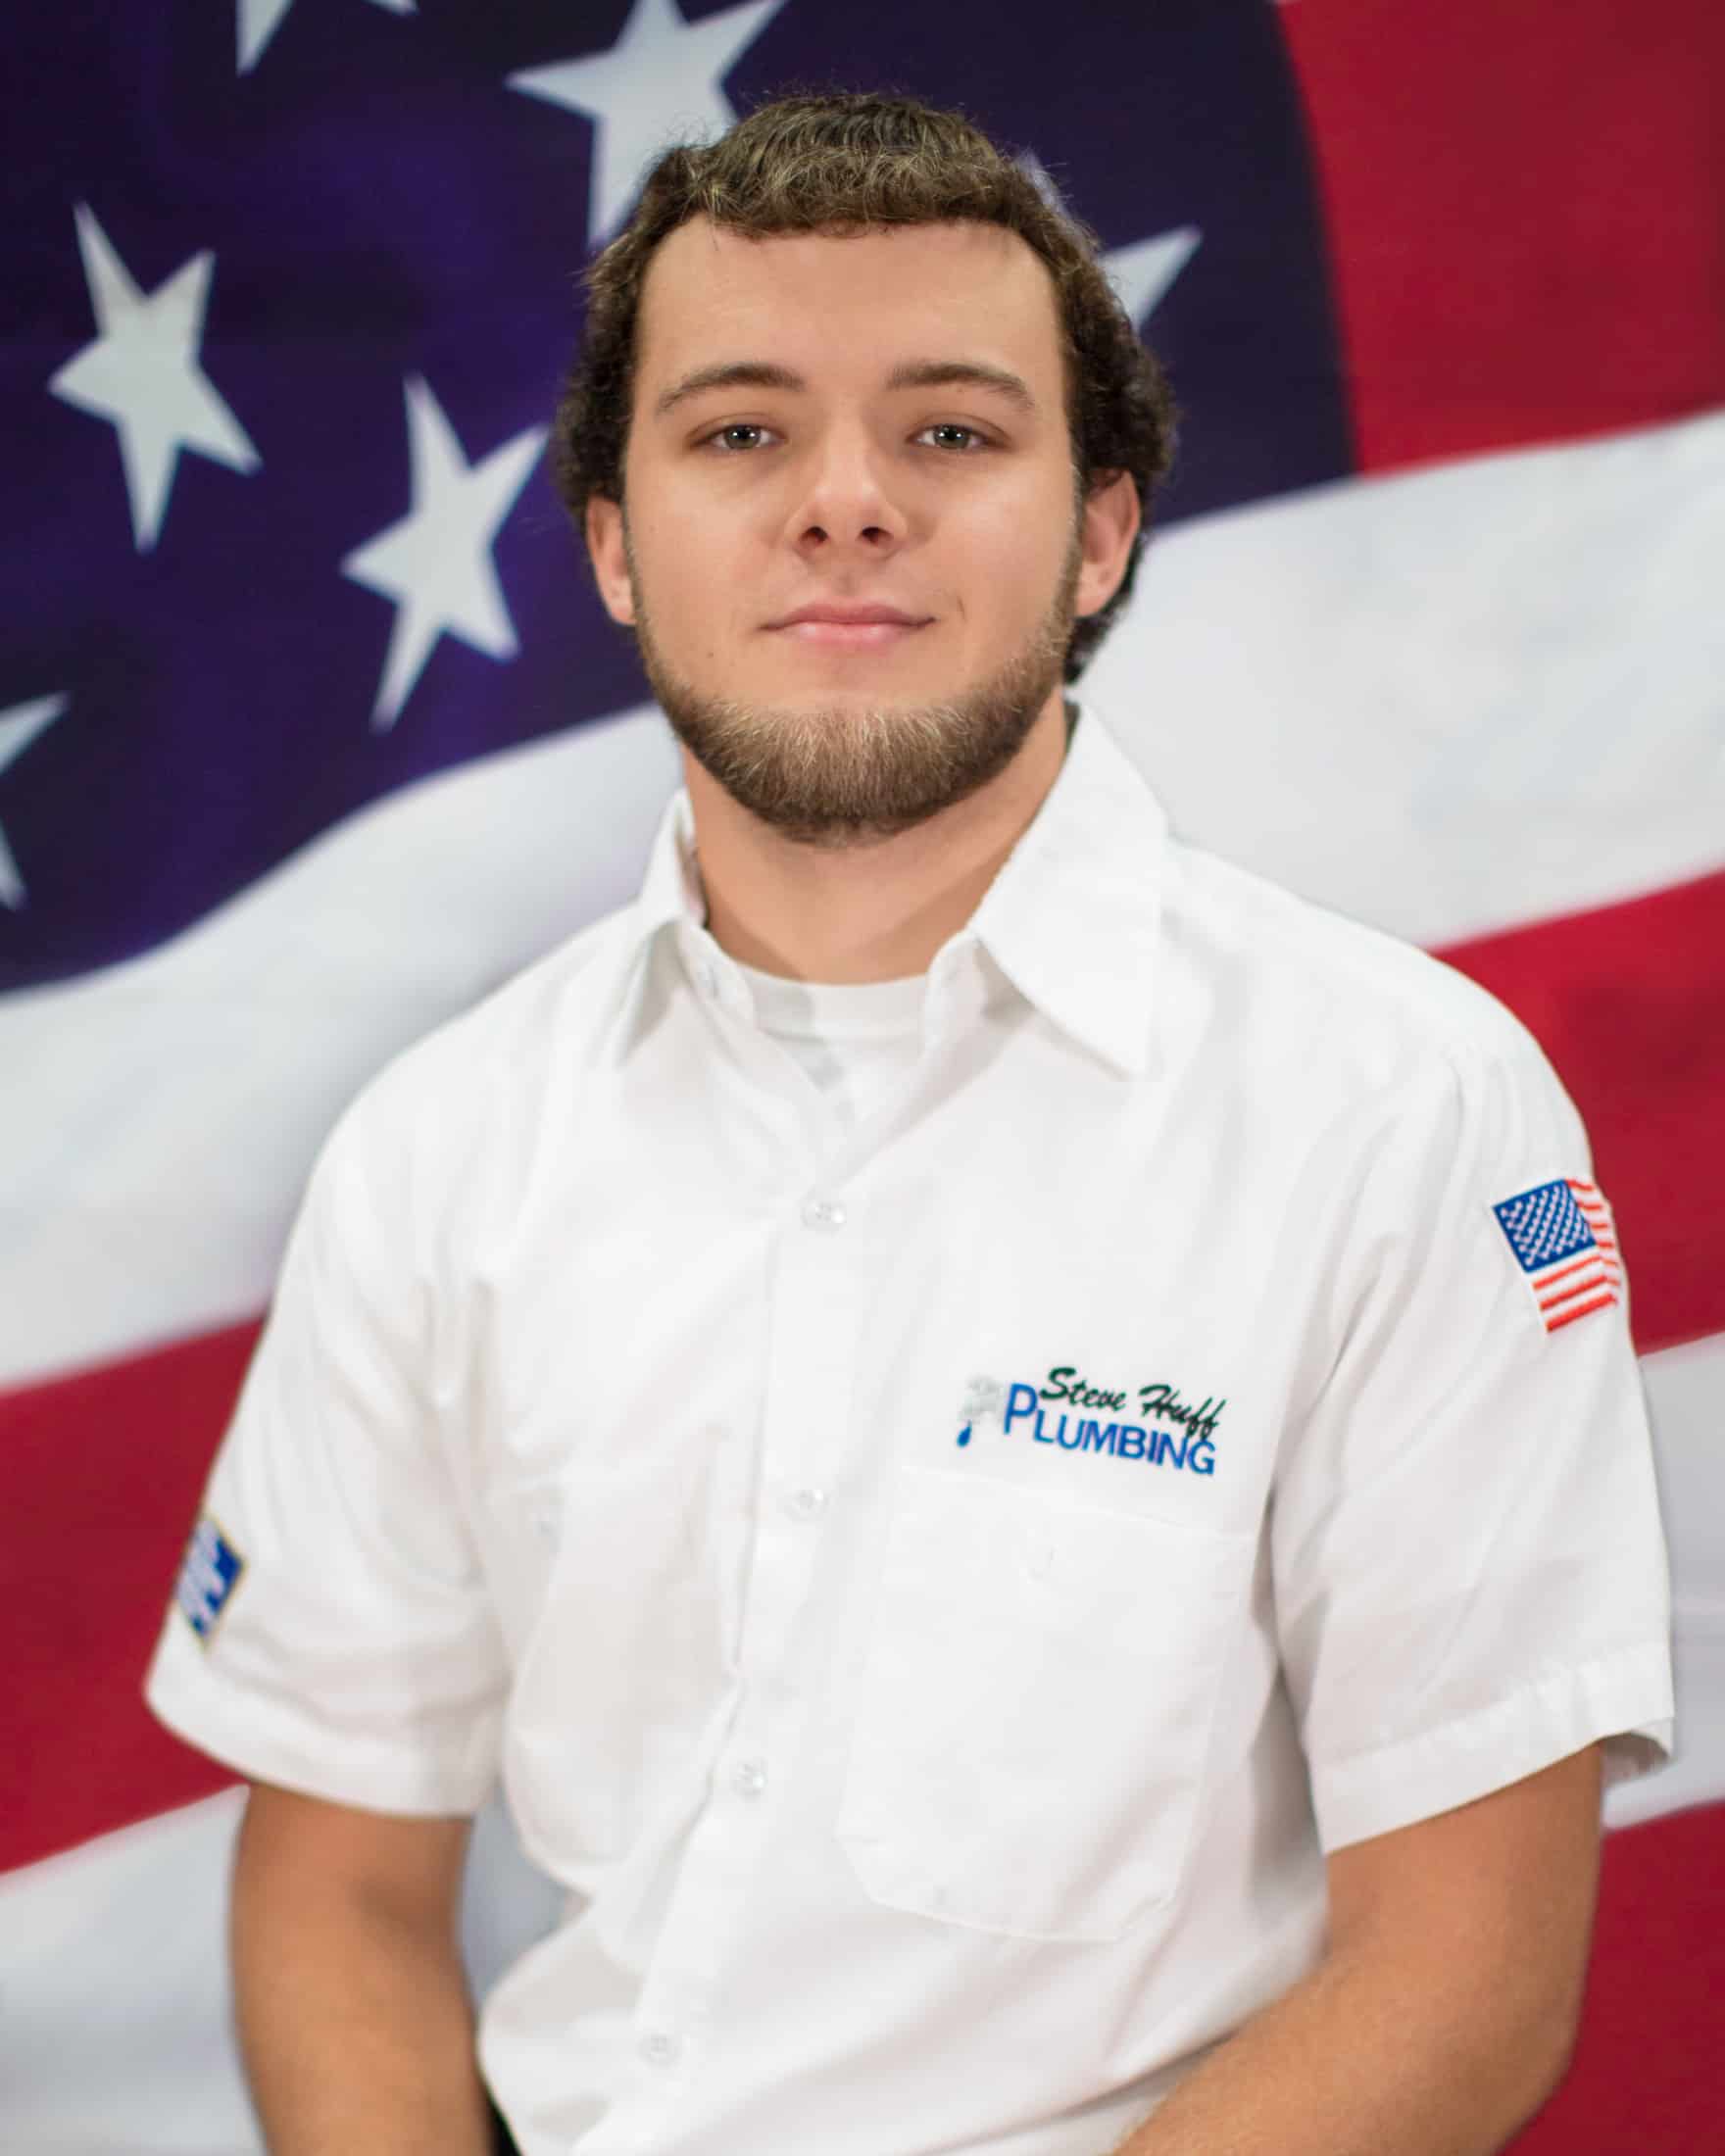 plumber in white shirt sitting in front of American flag